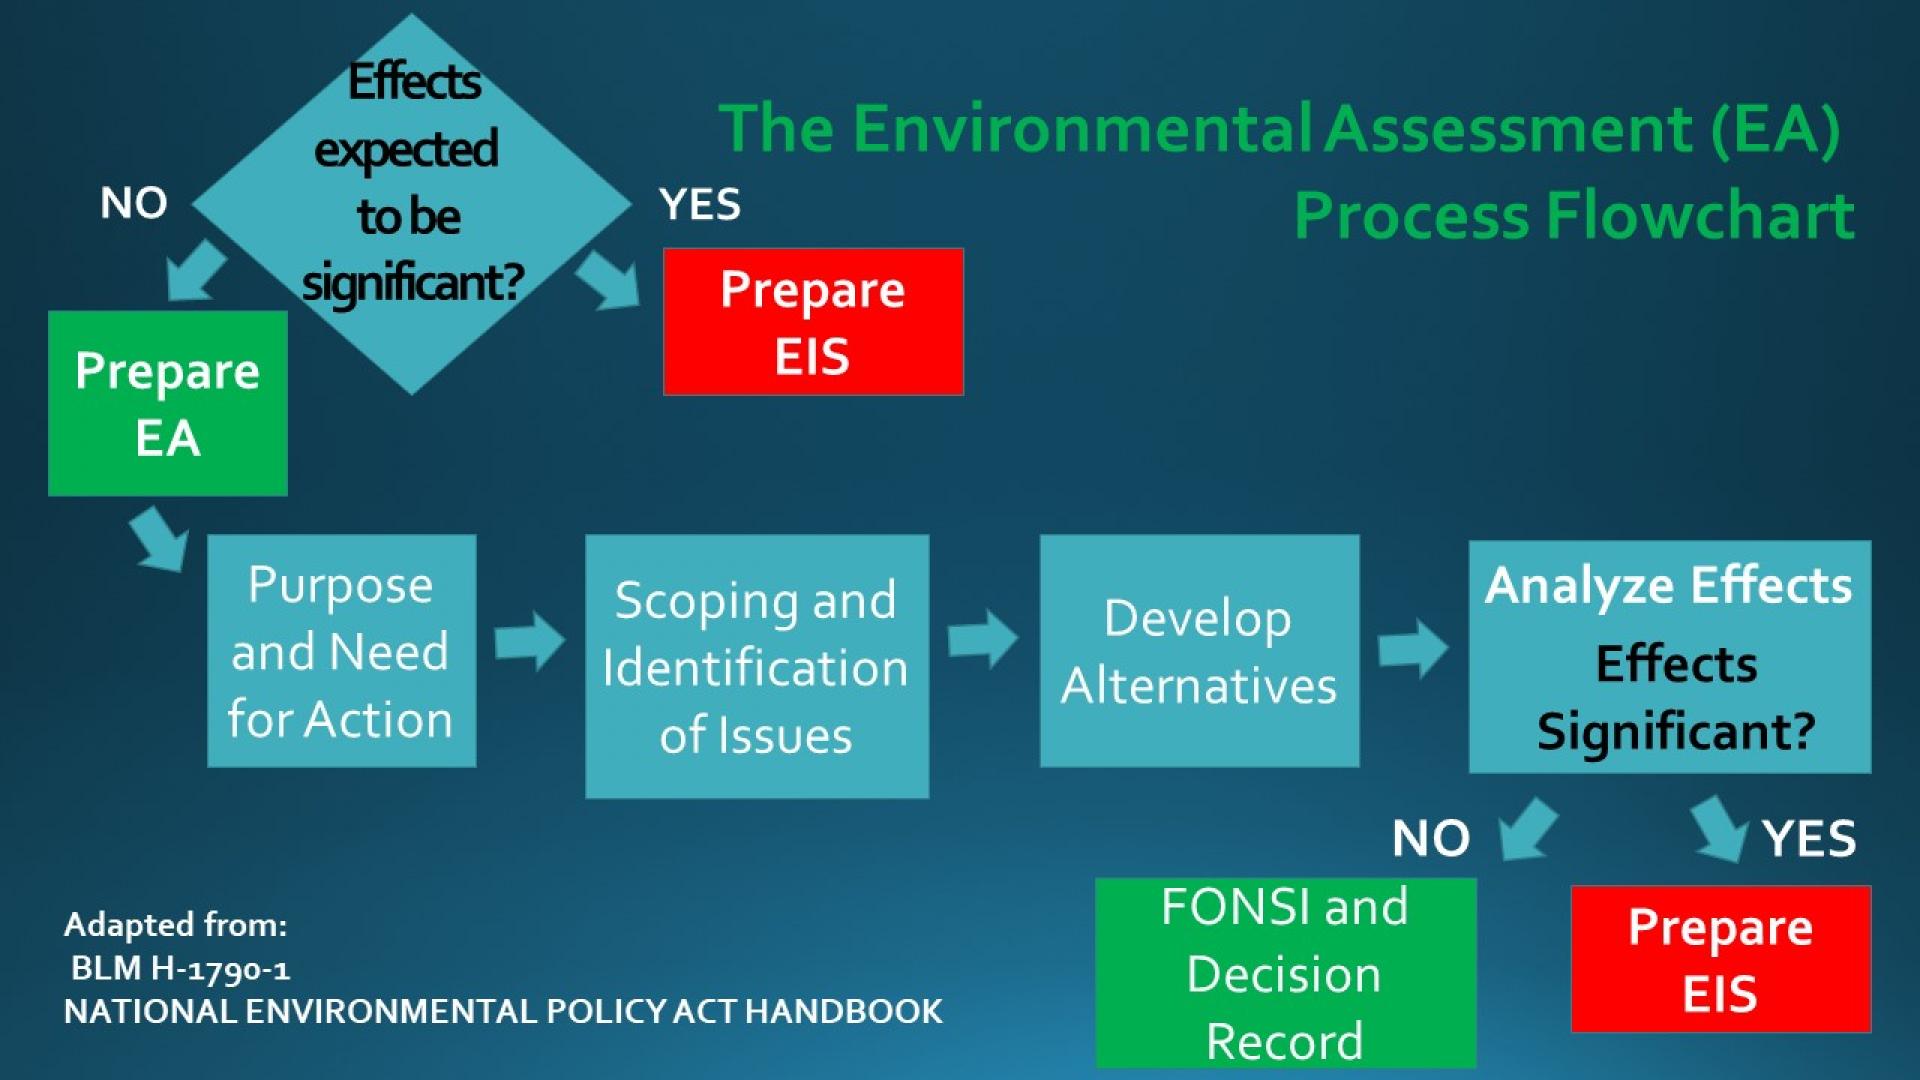 image of Environmental Assessment Process